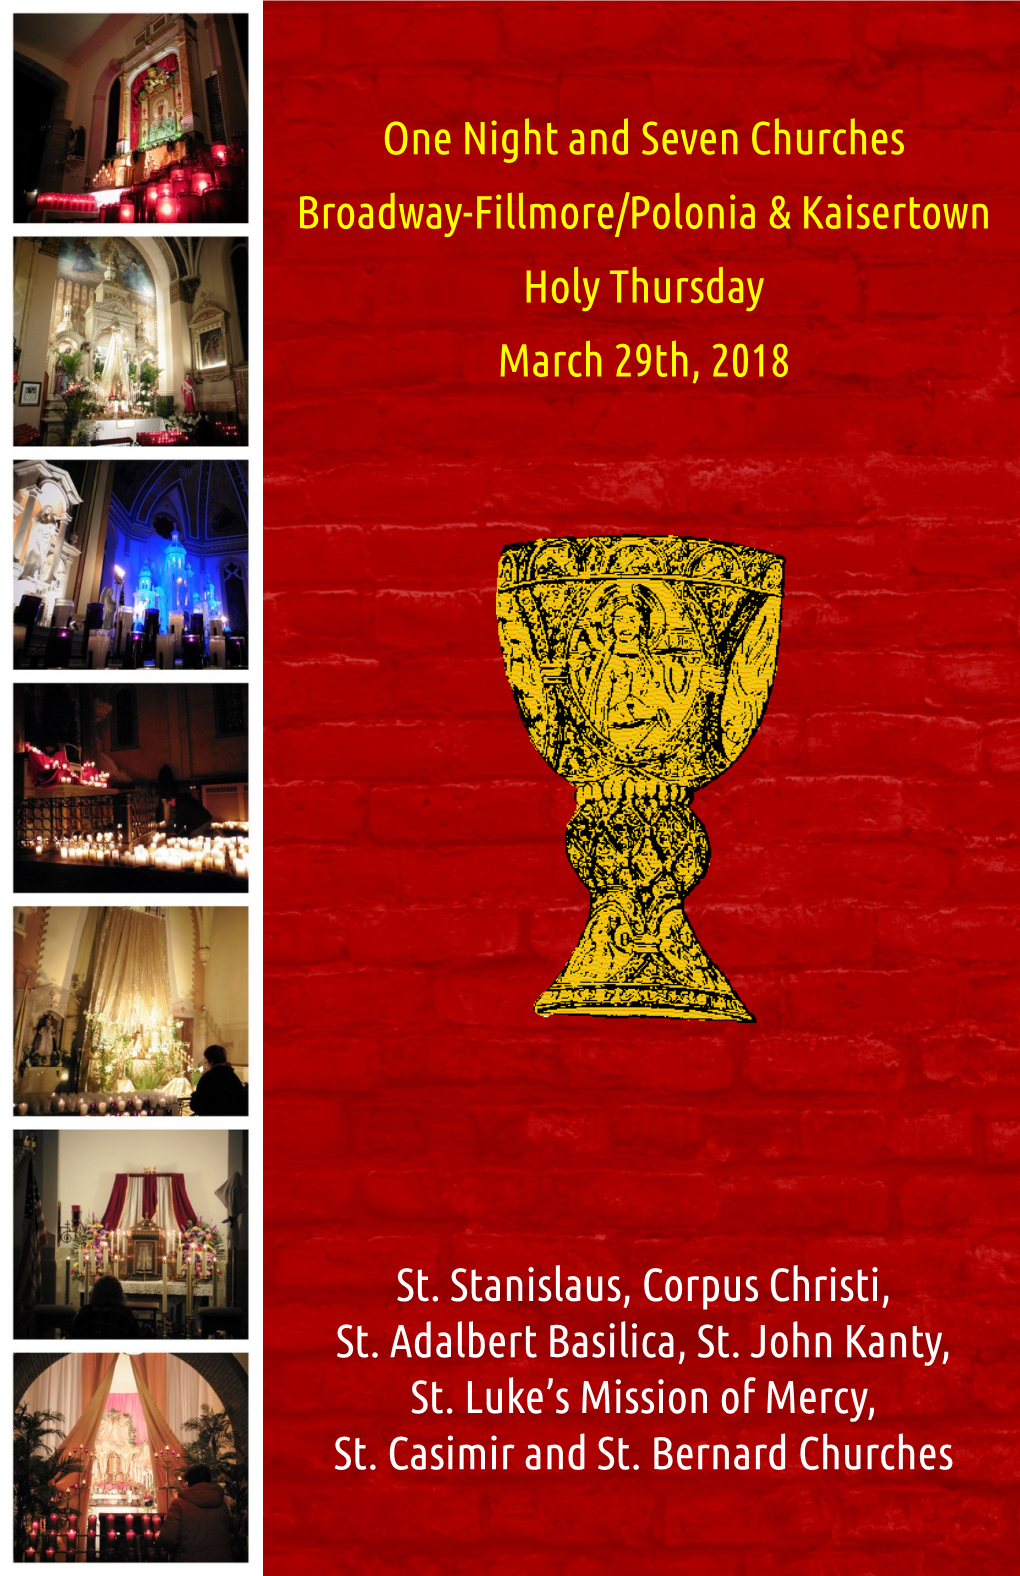 One Night and Seven Churches Broadway-Fillmore/Polonia & Kaisertown Holy Thursday March 29Th, 2018